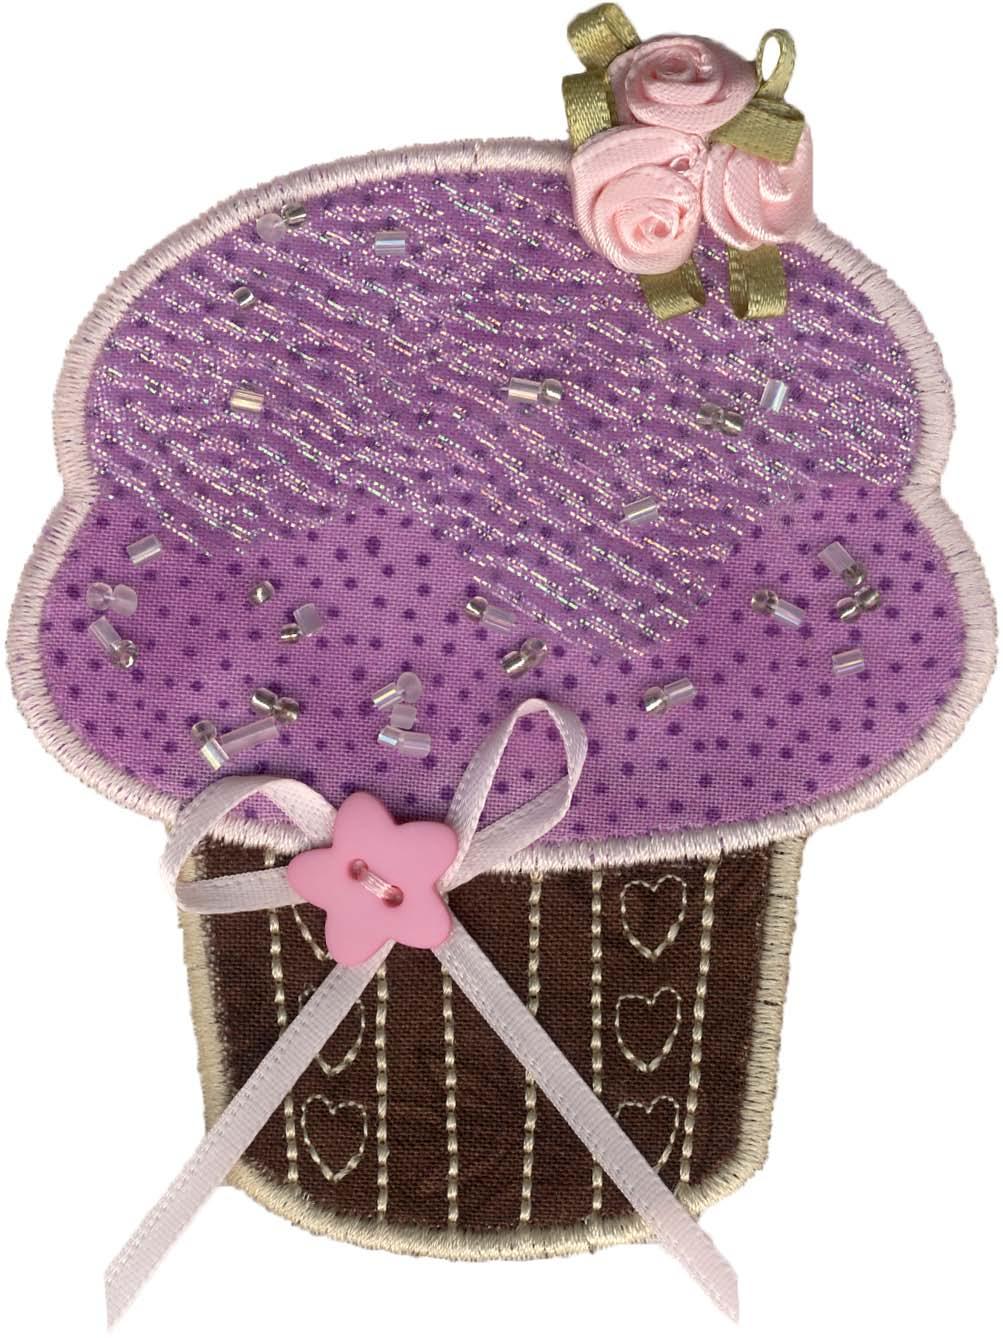 12397-05 Leopard & Lace Cupcake Additional embellishments used: Pink star button & piece of lace trim handstitched in place between the two layers of icing.